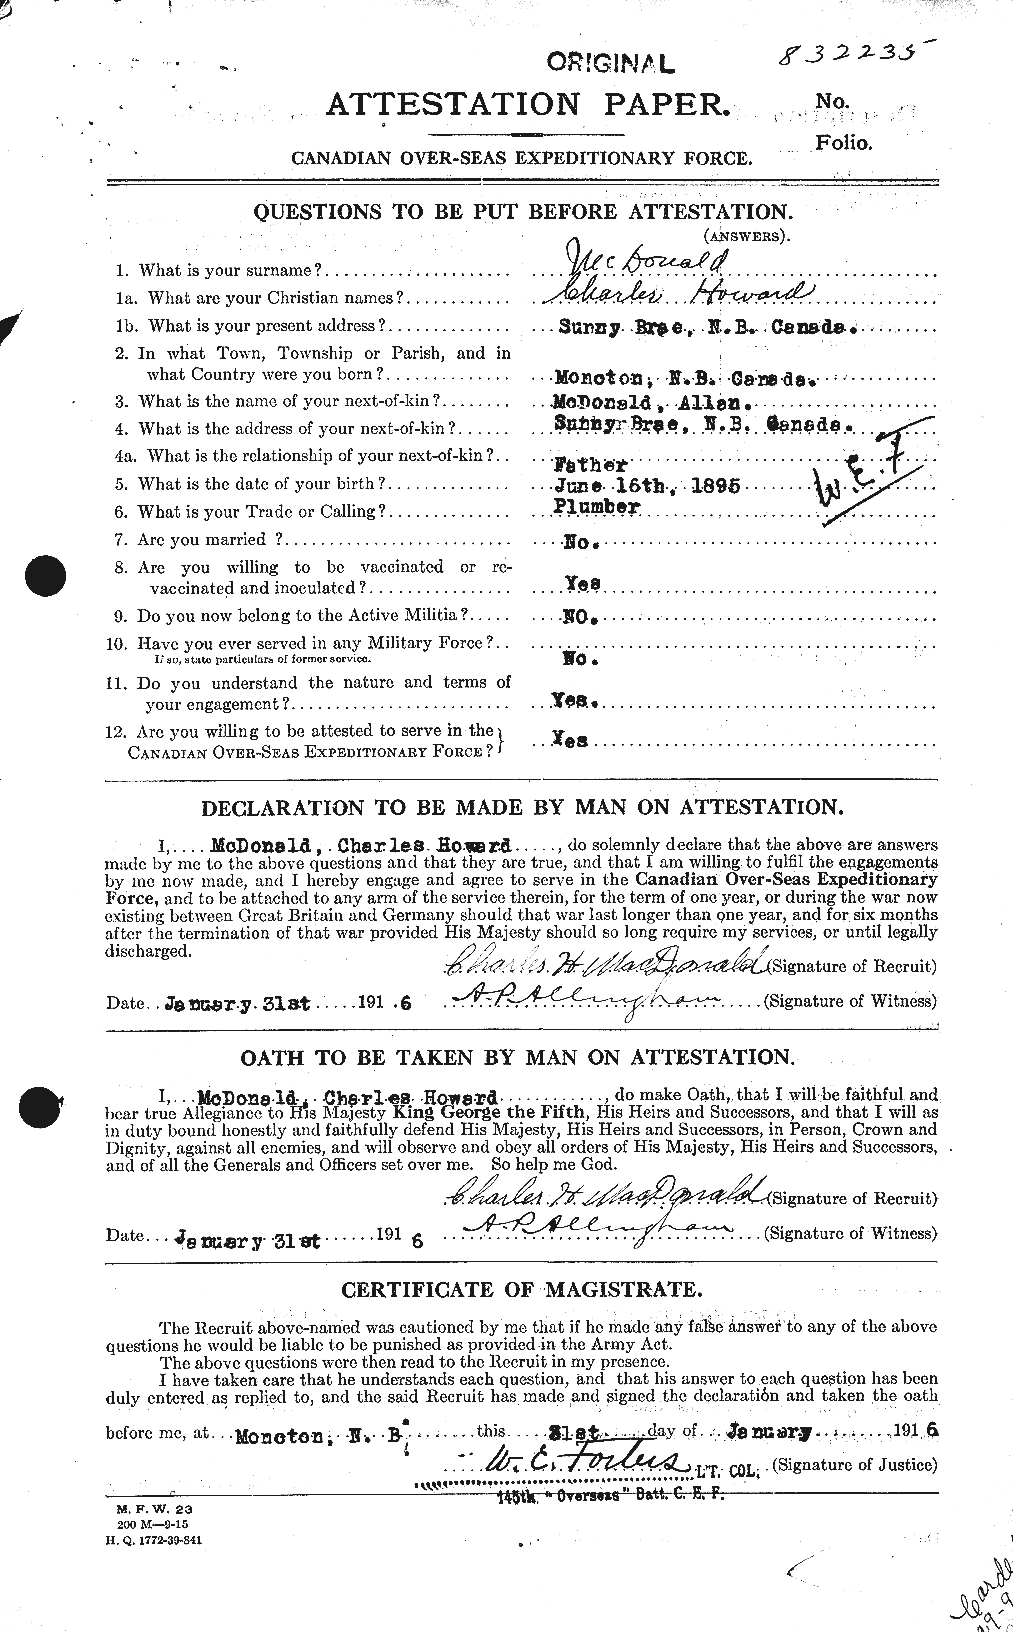 Personnel Records of the First World War - CEF 517411a